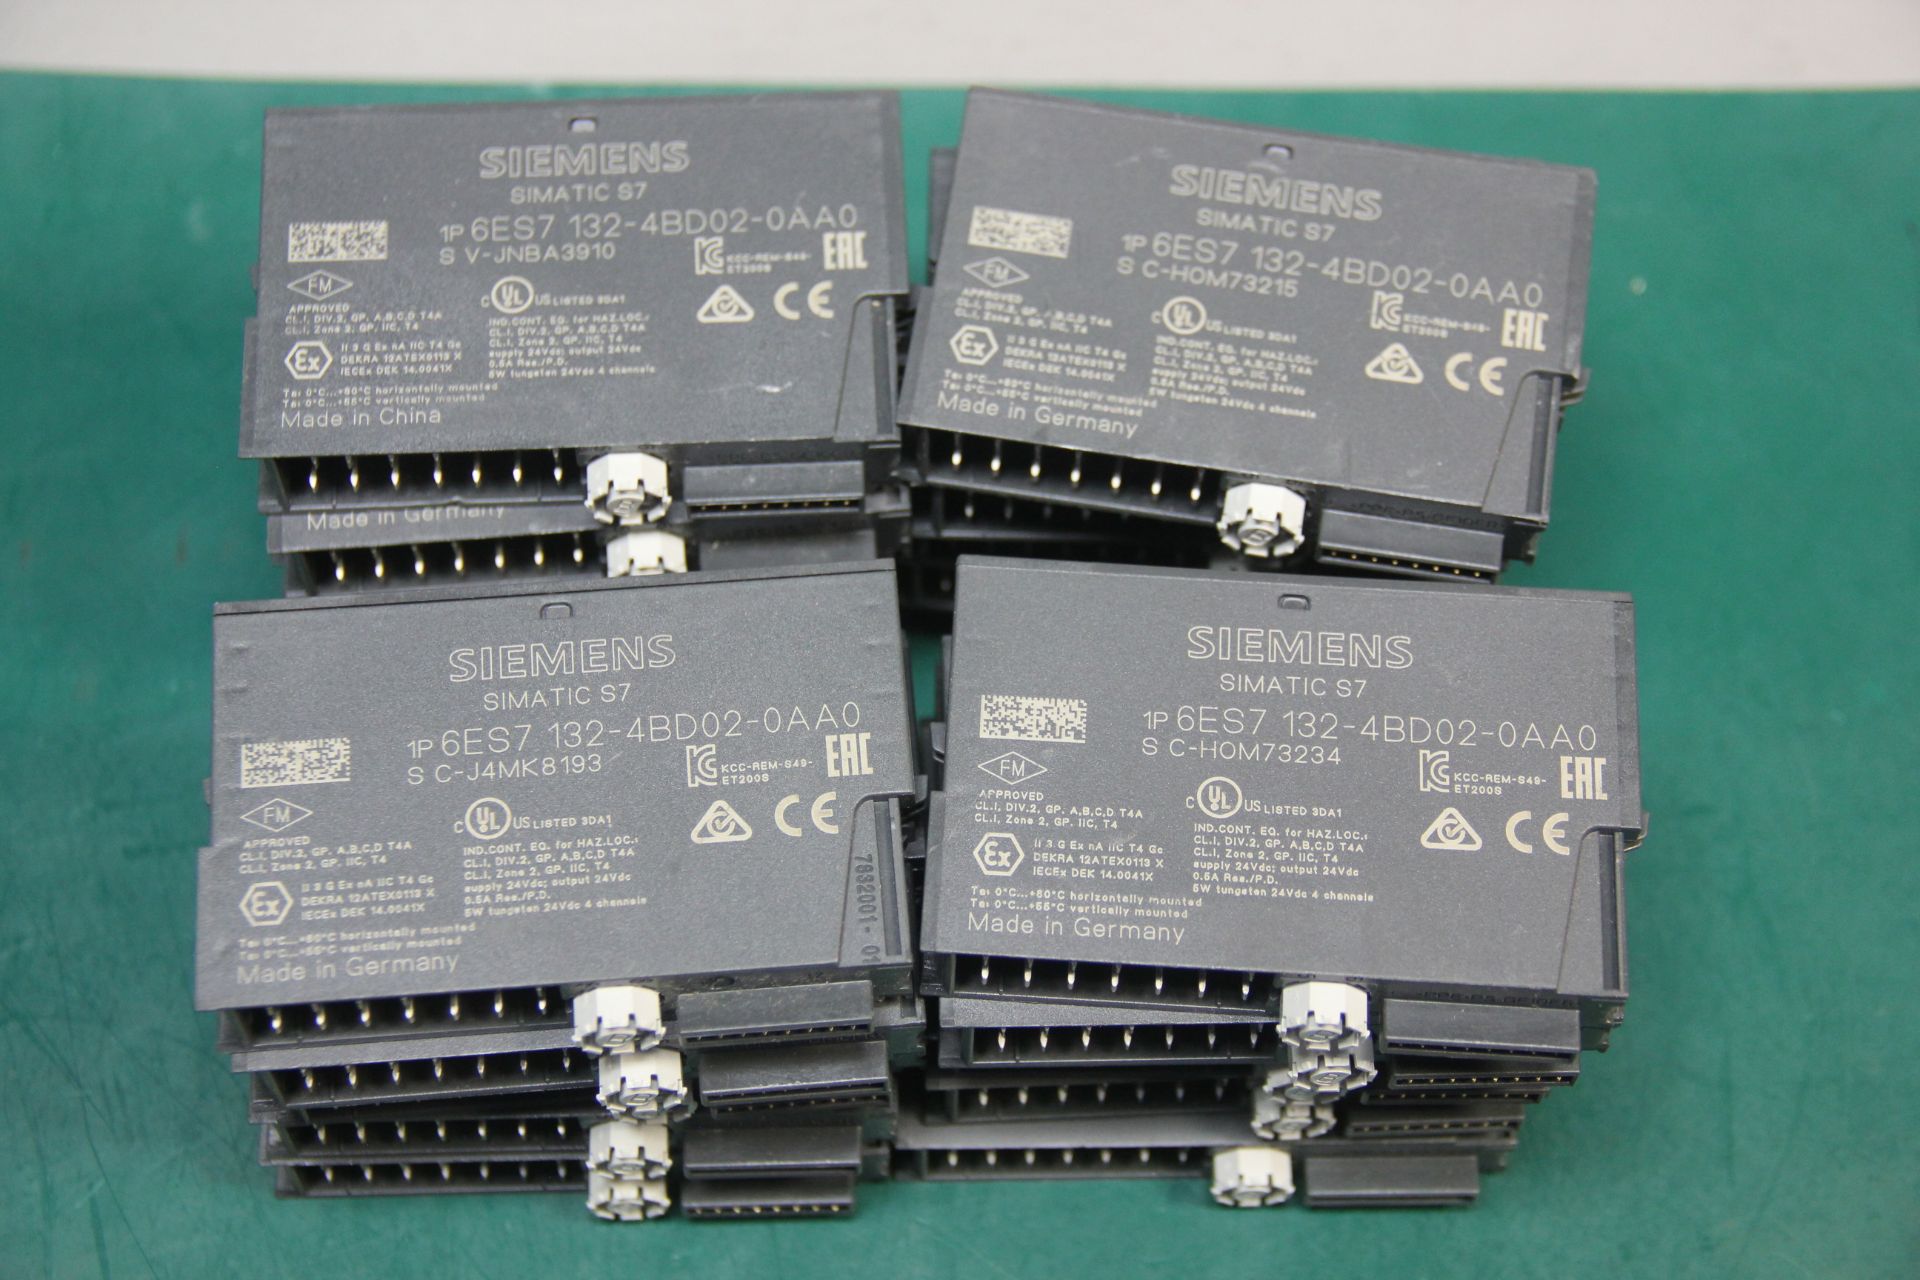 LOT OF 20 SIEMENS SIMATIC S7 ELECTRONIC MODULES - Image 2 of 2